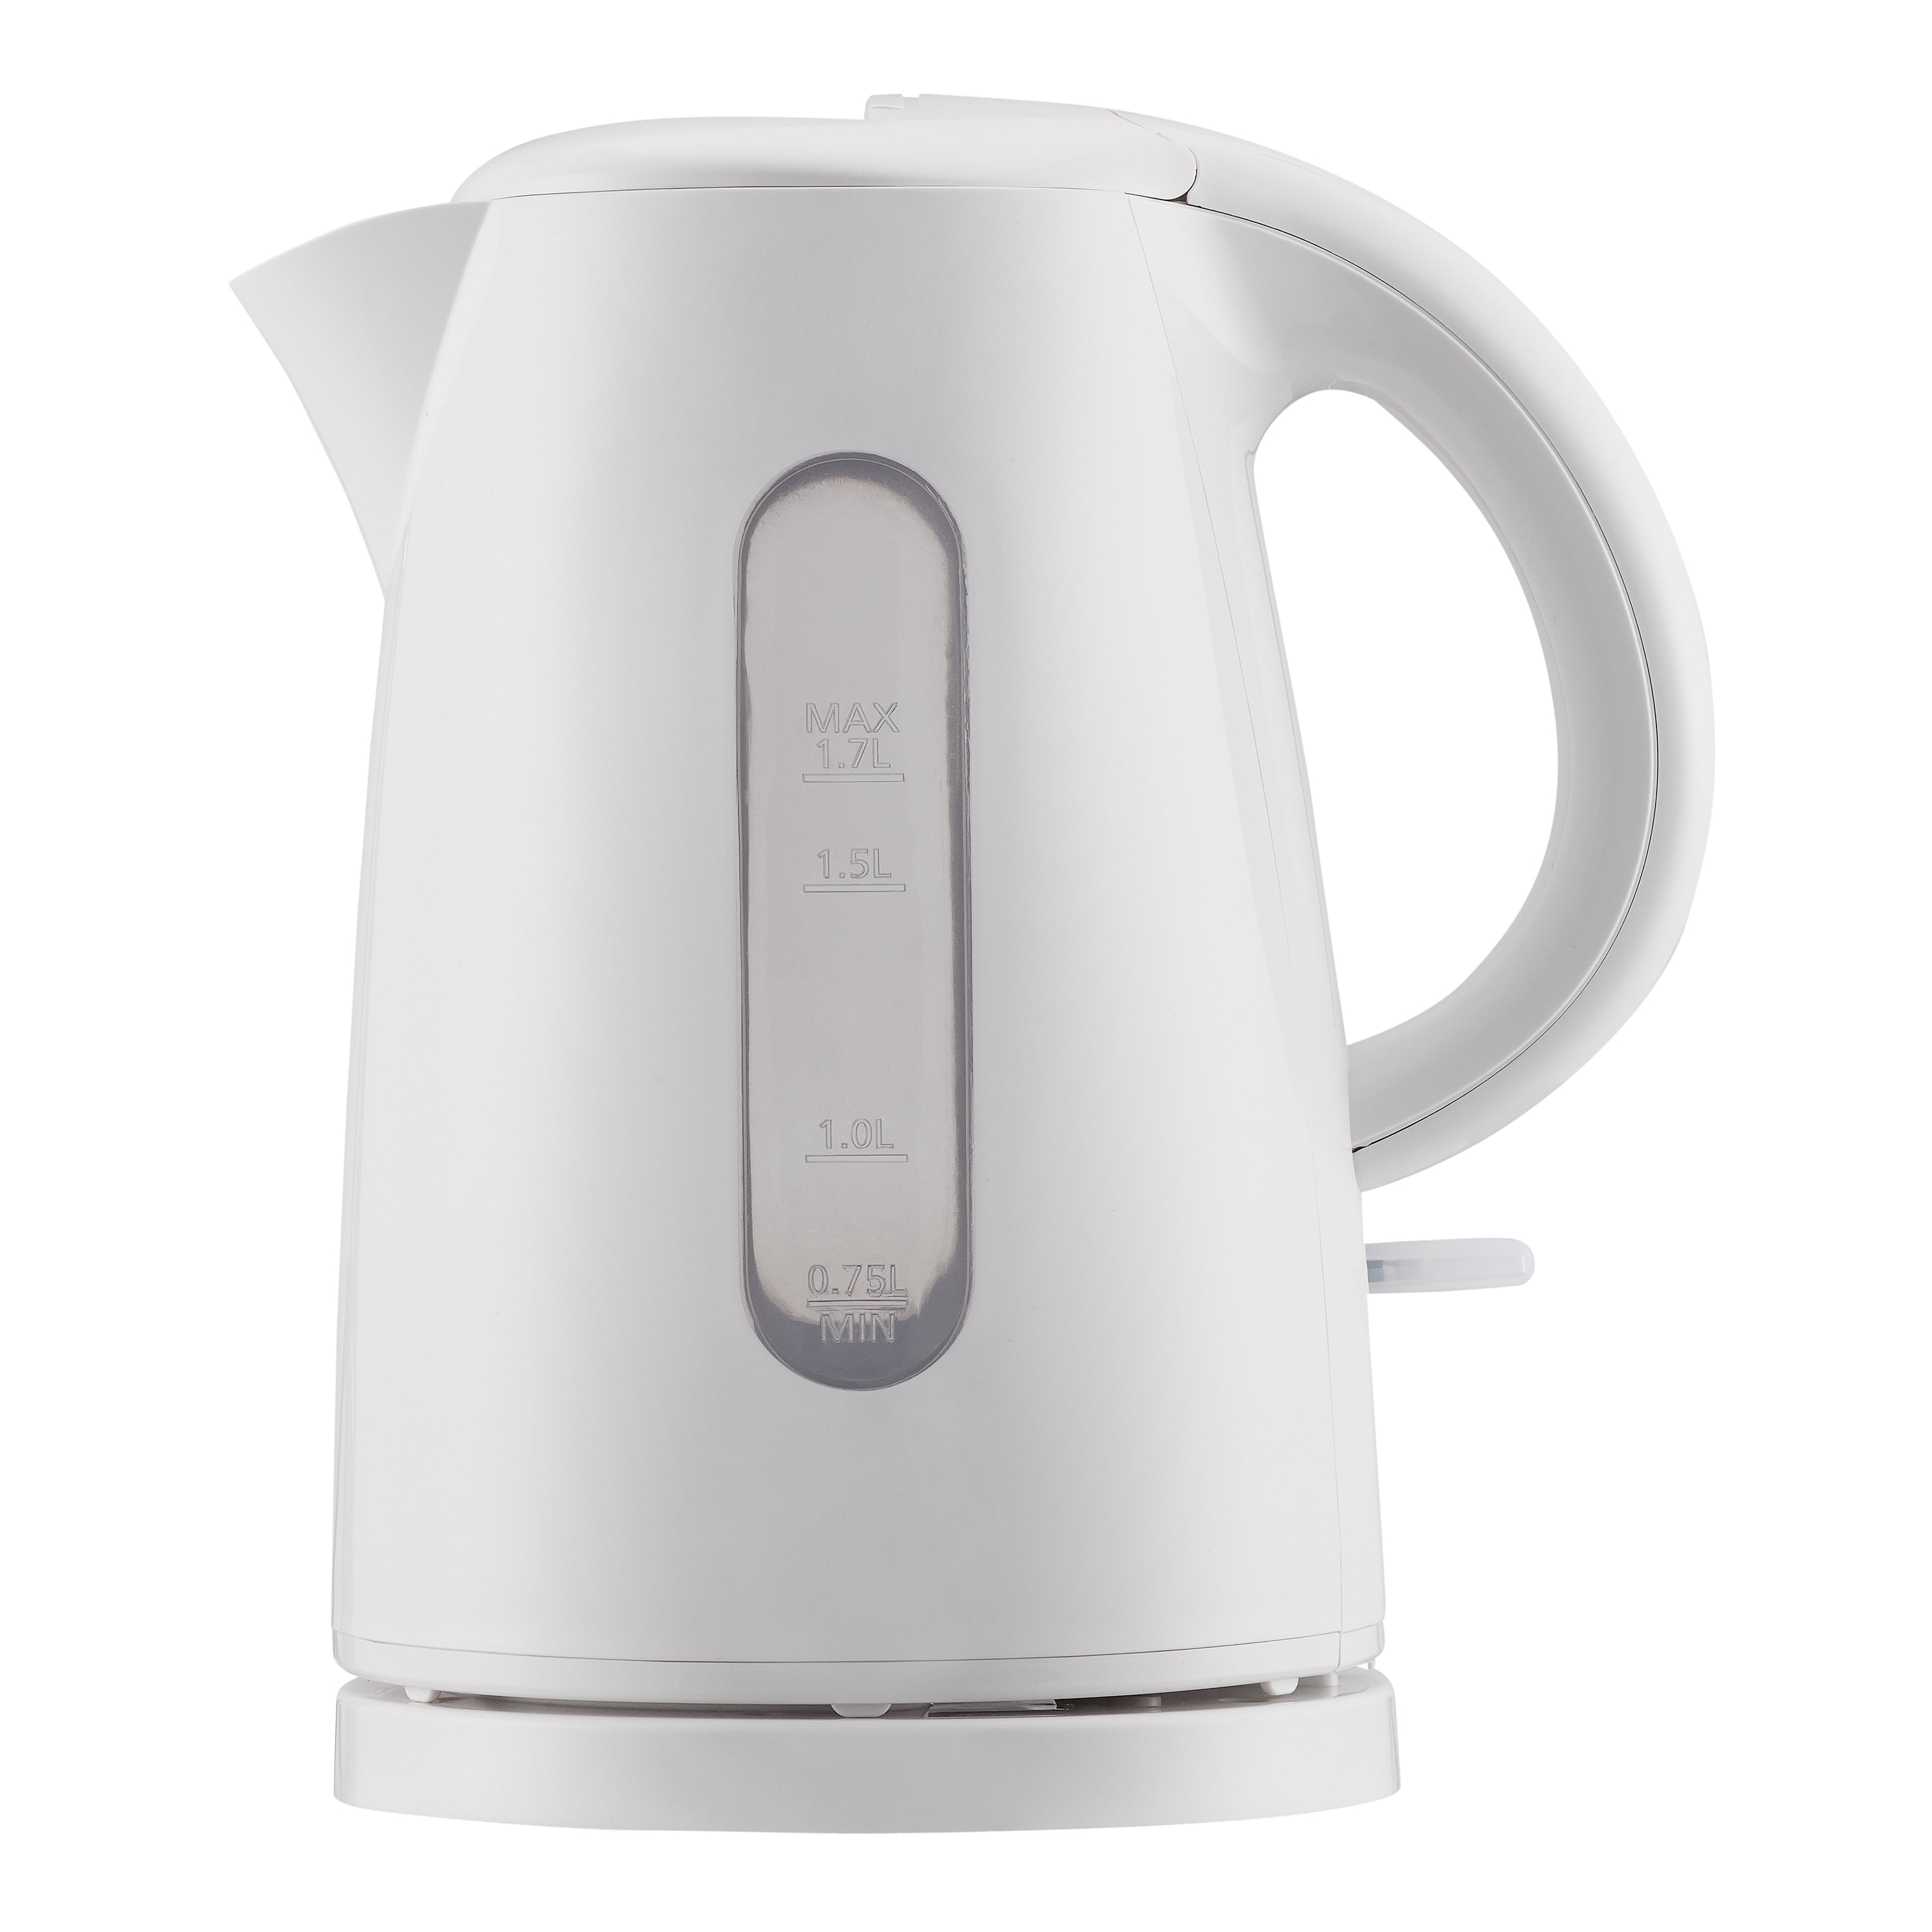 How To Use An Electric Kettle To Boil Water-Easy Tutorial 